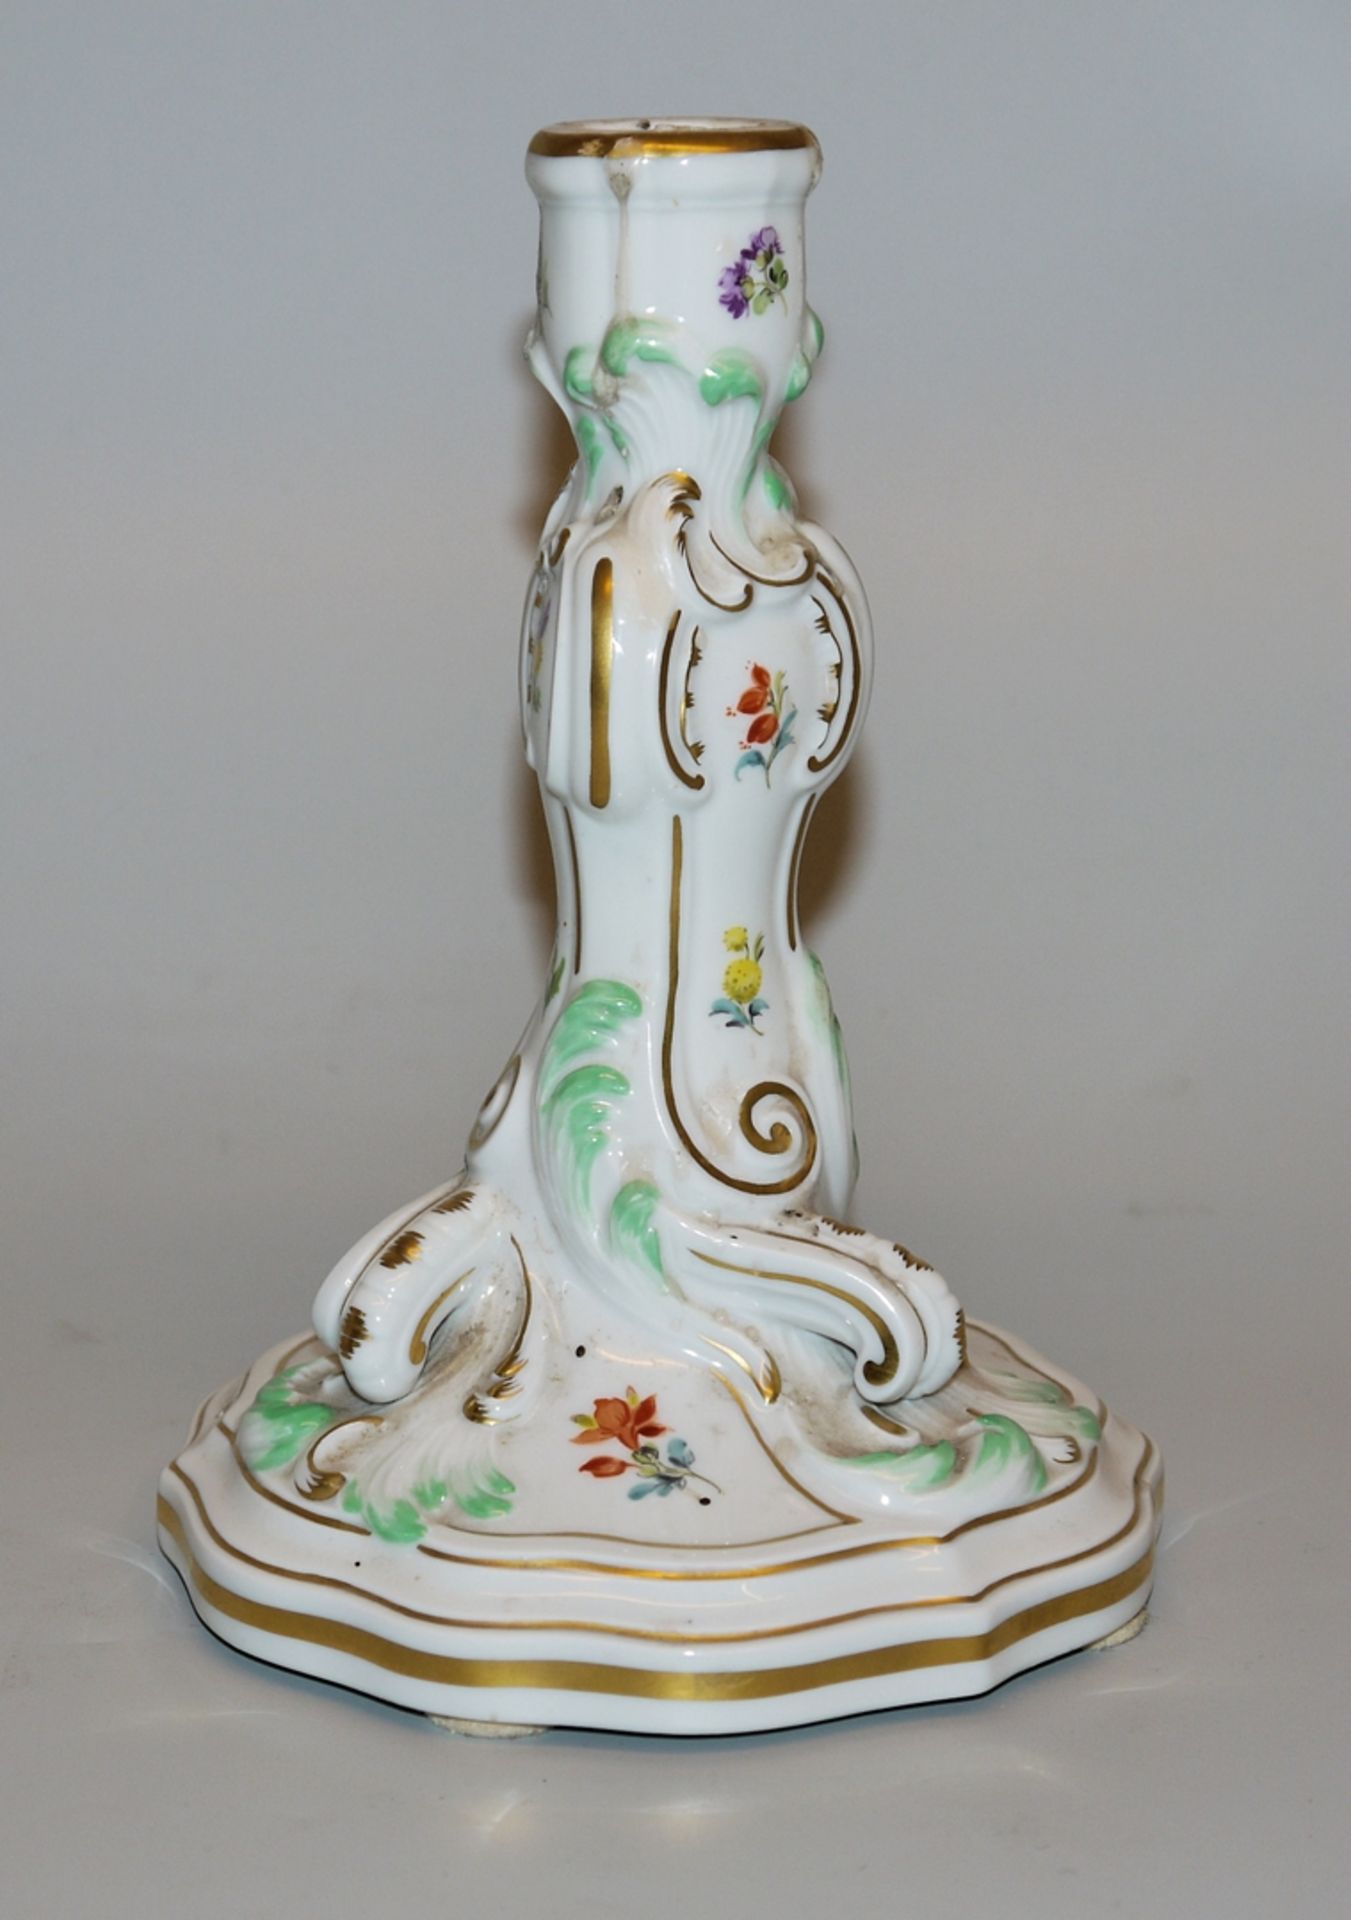 5 x fine porcelain, Ludwigsburg and Meissen from 1750 - Image 5 of 5